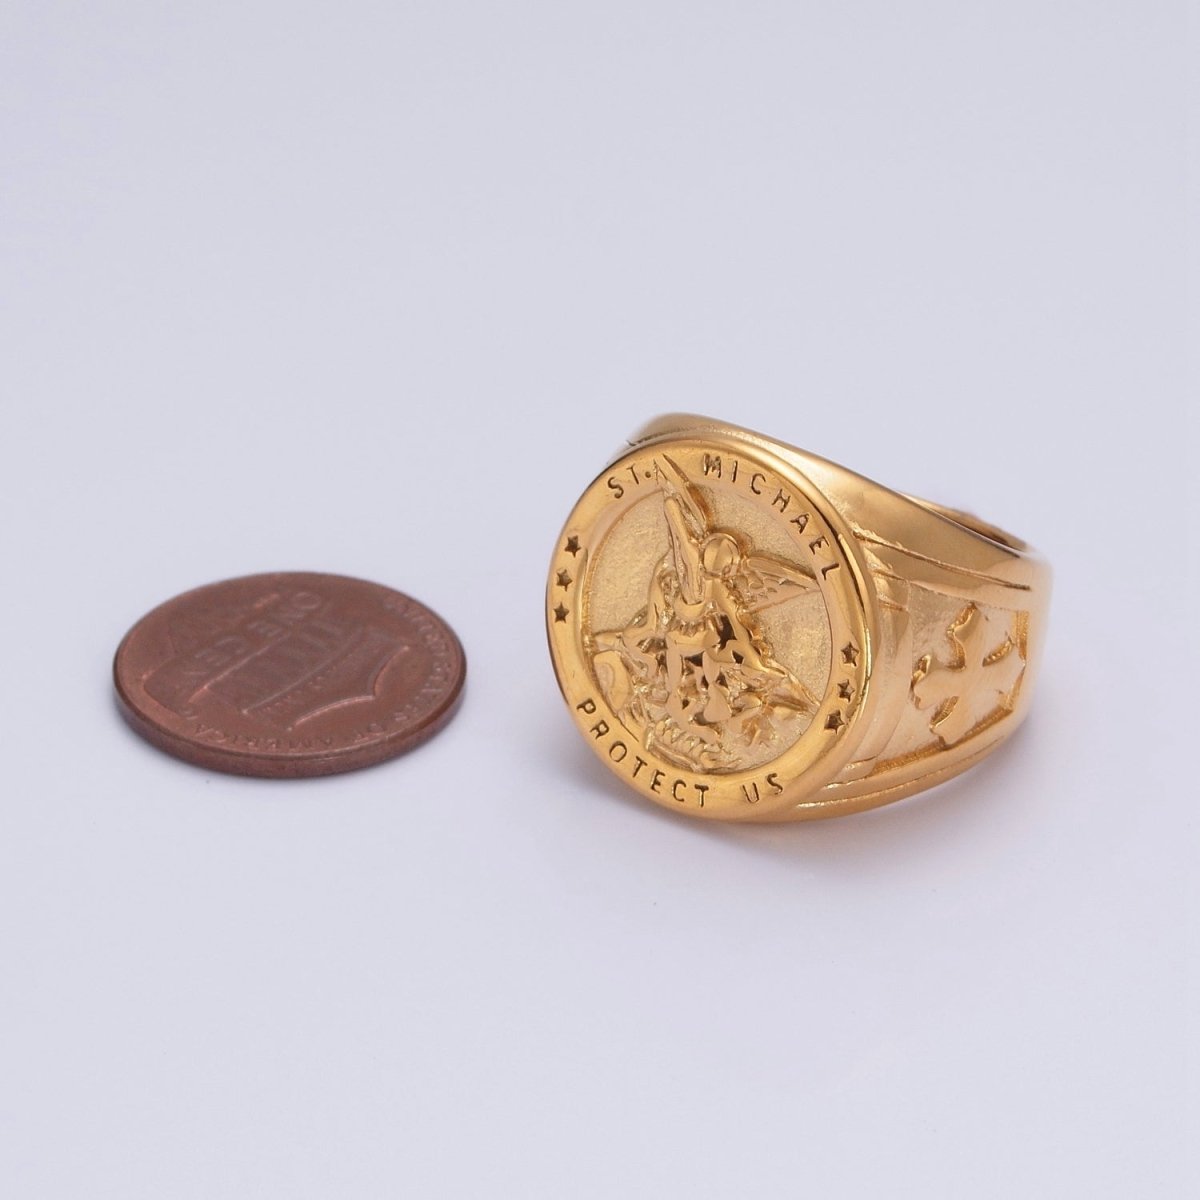 Gold, Silver, Bronze, Mixed Metal Stainless Steel Saint St. Michael Protection Signet Ring S-014 S-015 S-016 S-017 S-332 S-333 O-2017 O-2018 - DLUXCA